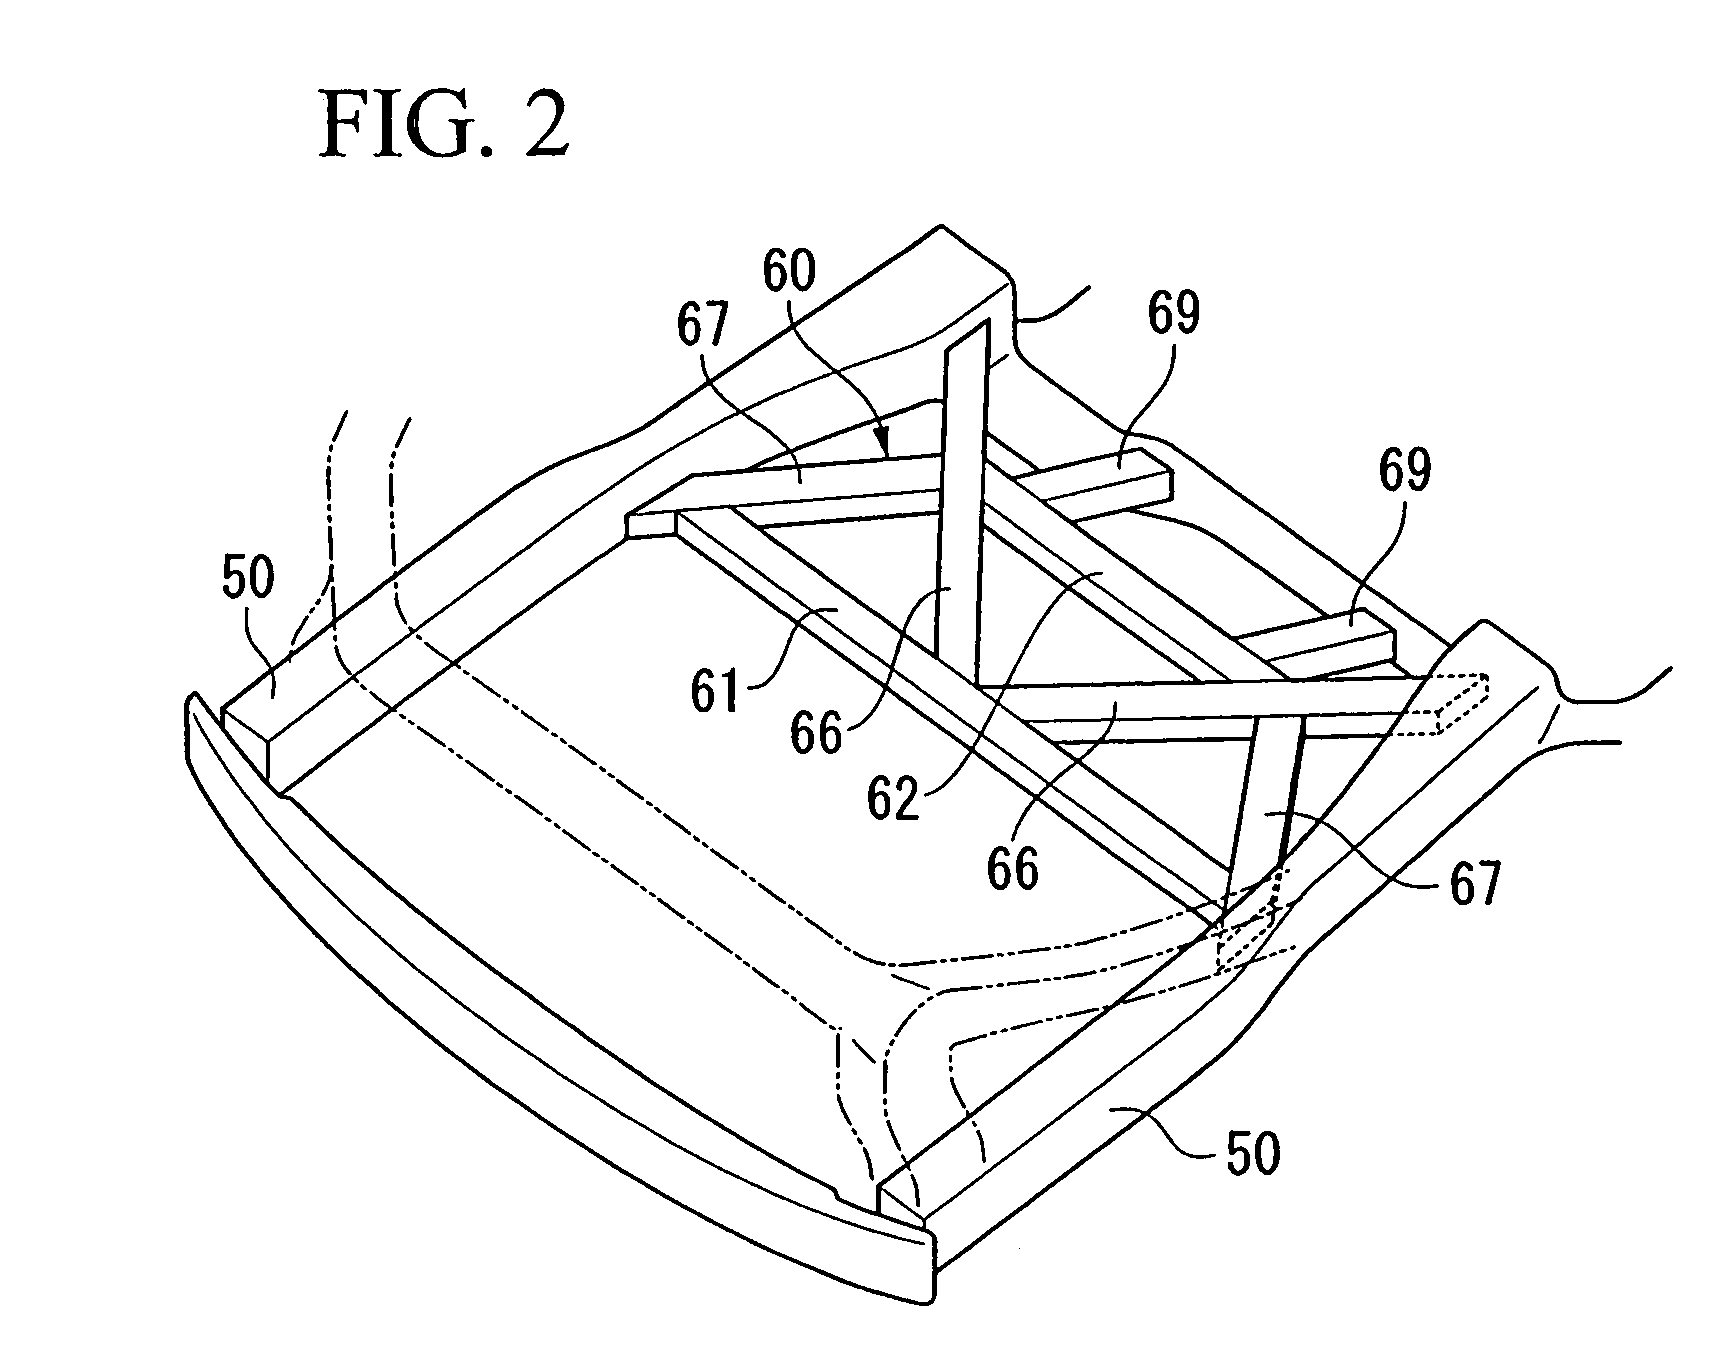 Fuel cell vehicle having support frame which couples side frames in width direction of vehicle